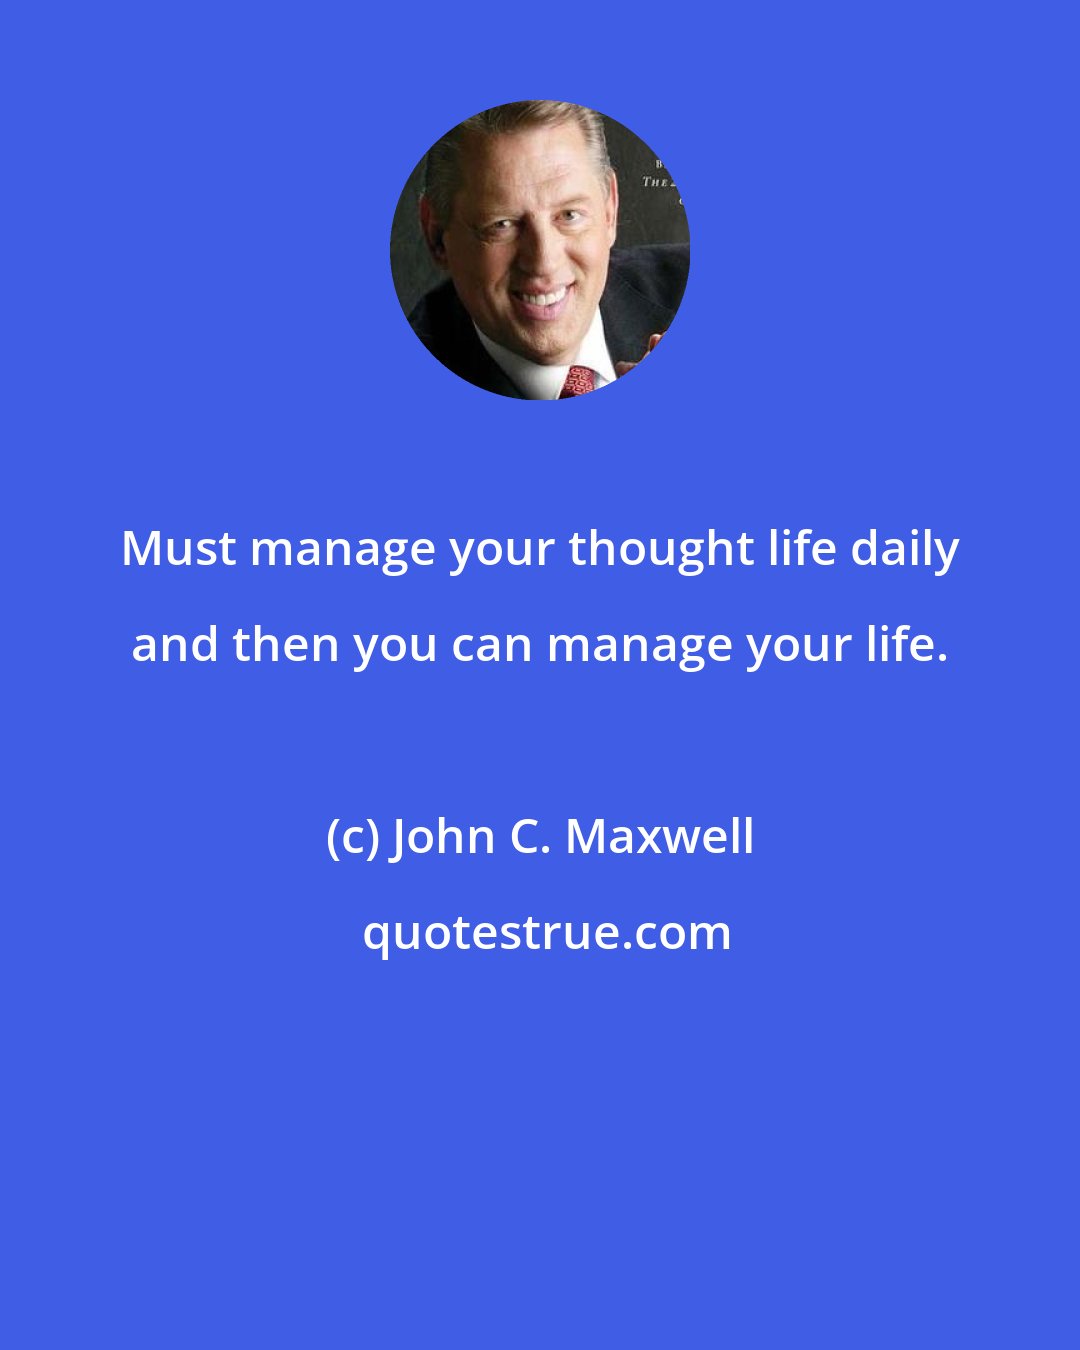 John C. Maxwell: Must manage your thought life daily and then you can manage your life.